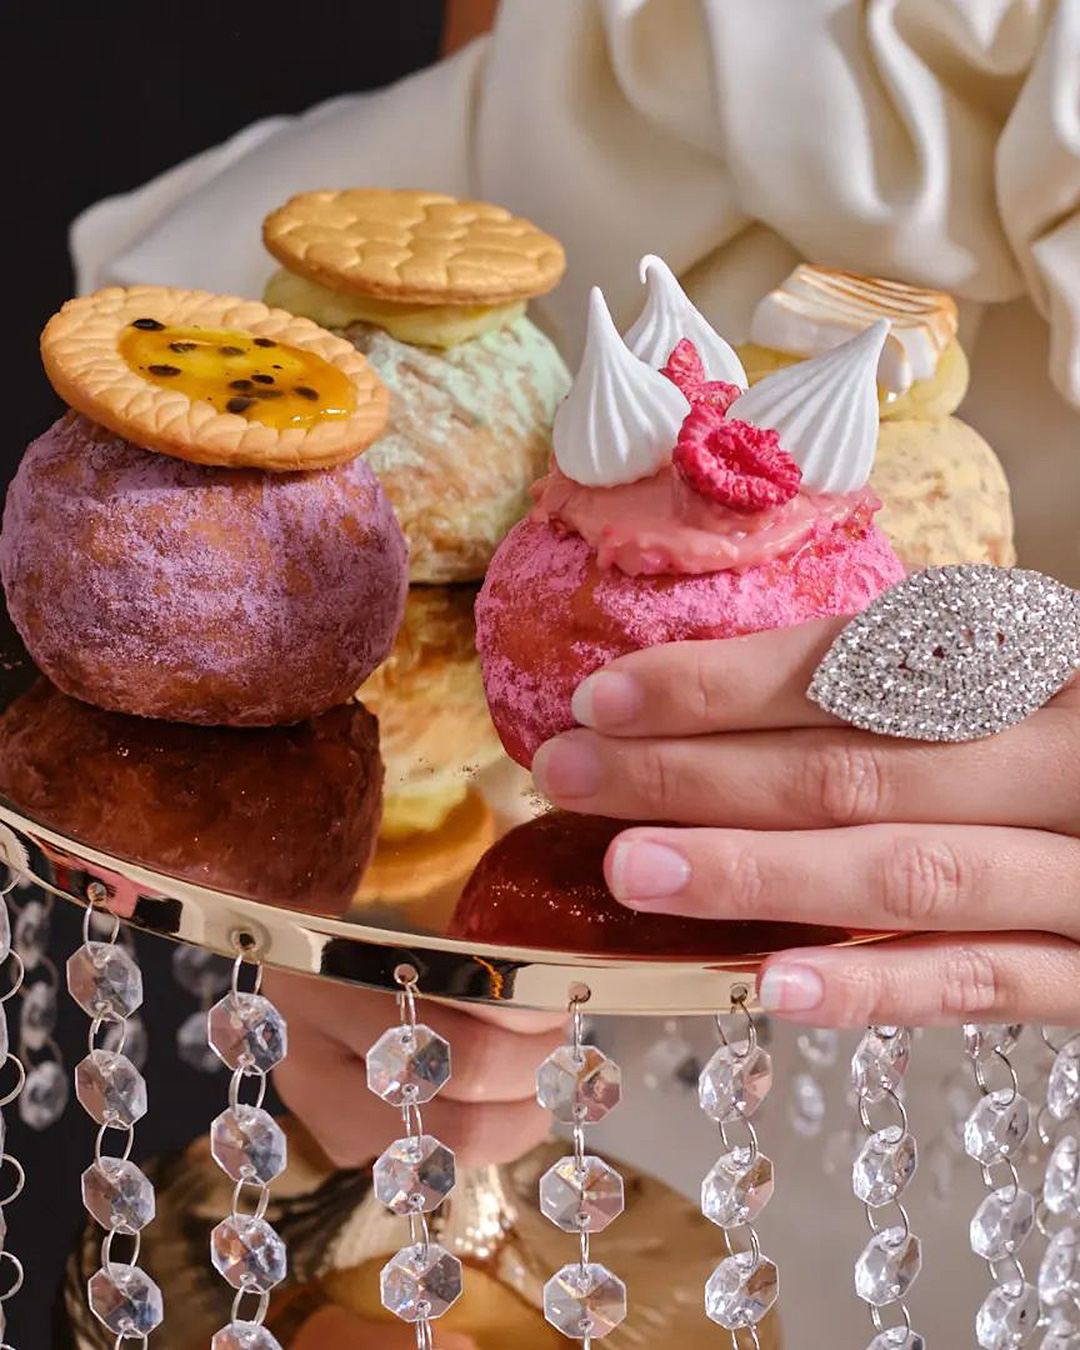 Showcase of couture dougnuts from New Zealand's first couture doughnut shop, Deverauxs